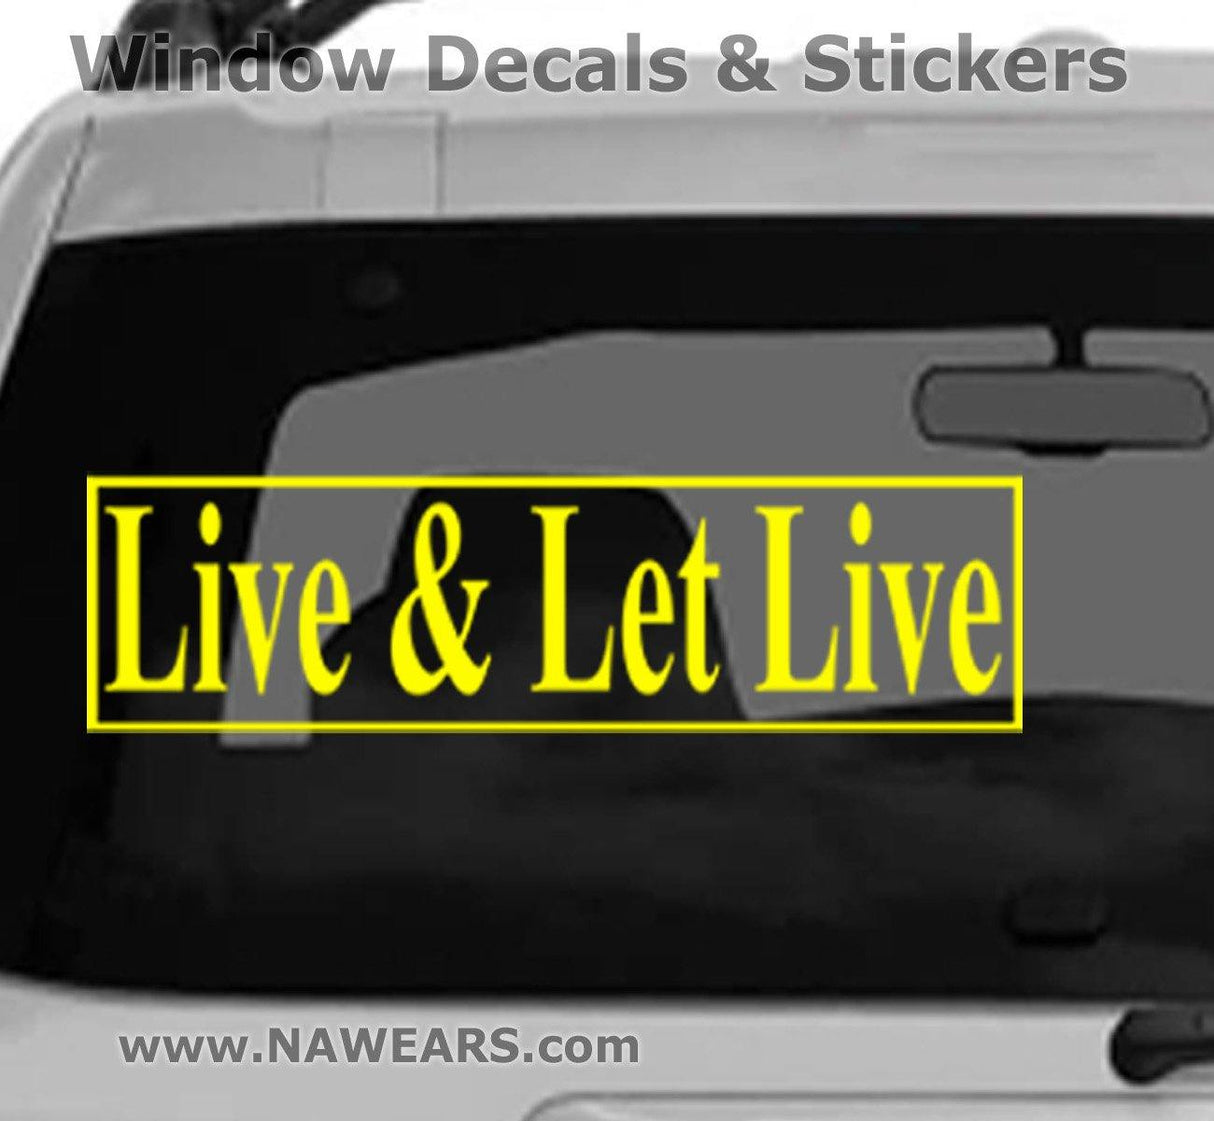 Win Decal - AA Live & Let Live - nawears